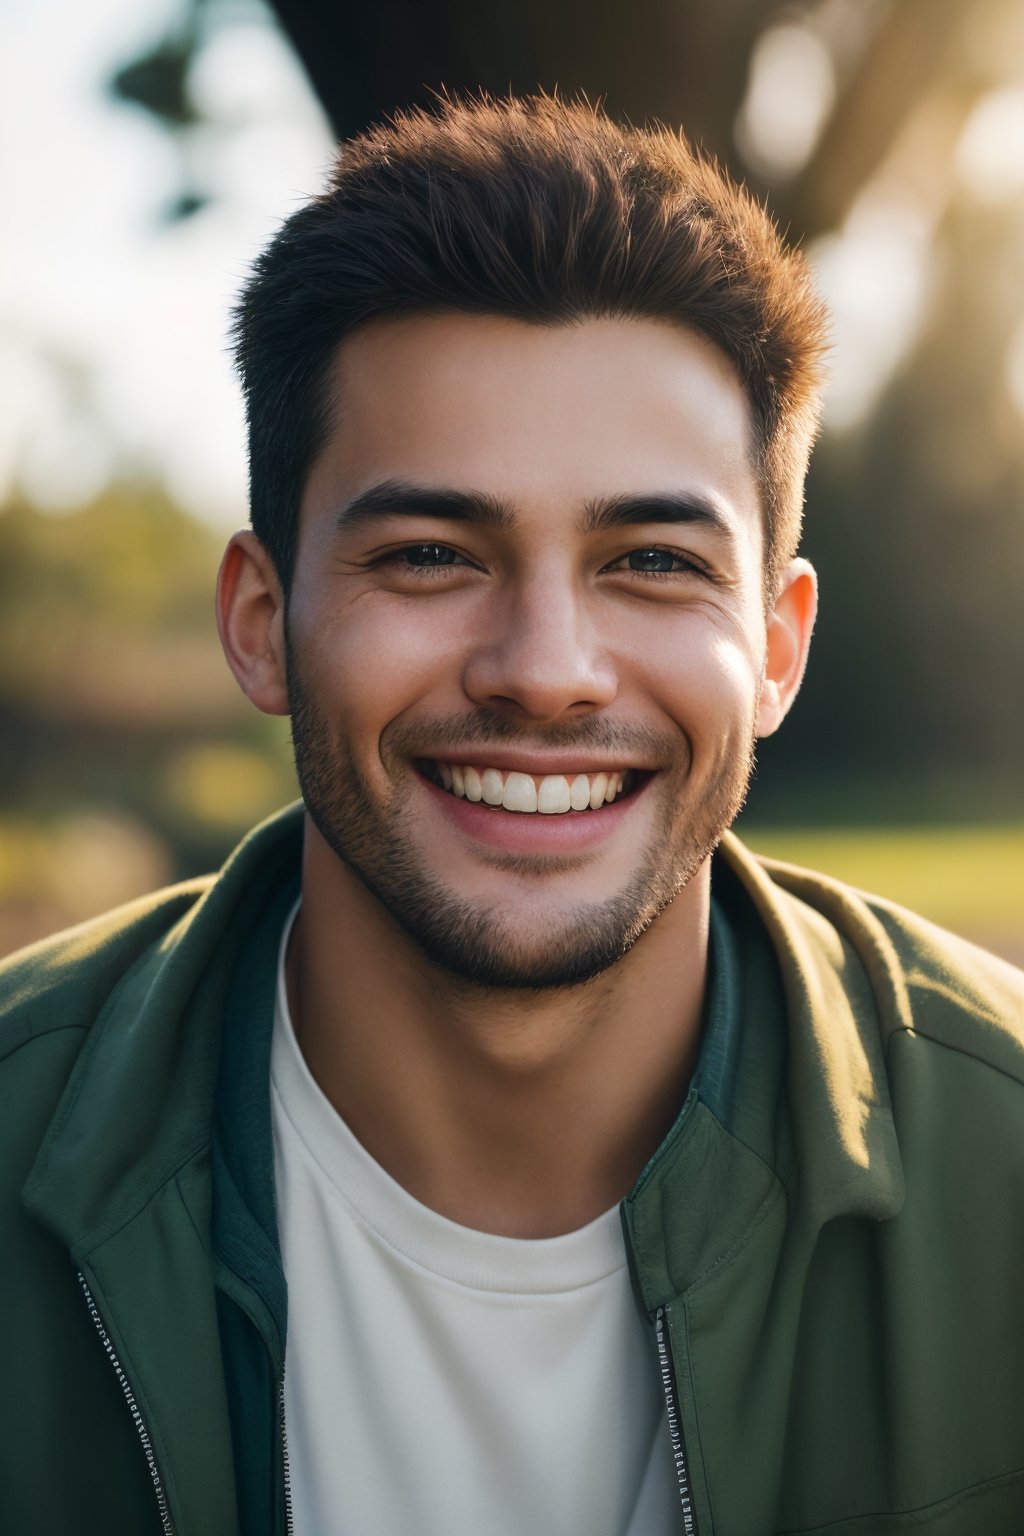 A (striking, compelling) photo-realistic close-up portrait of a man radiating joy with his heartfelt smile. The outdoor environment adds a touch of (natural, cinematic) beauty to the composition. This high-resolution masterpiece captures the warmth and sincerity in the man's expression.